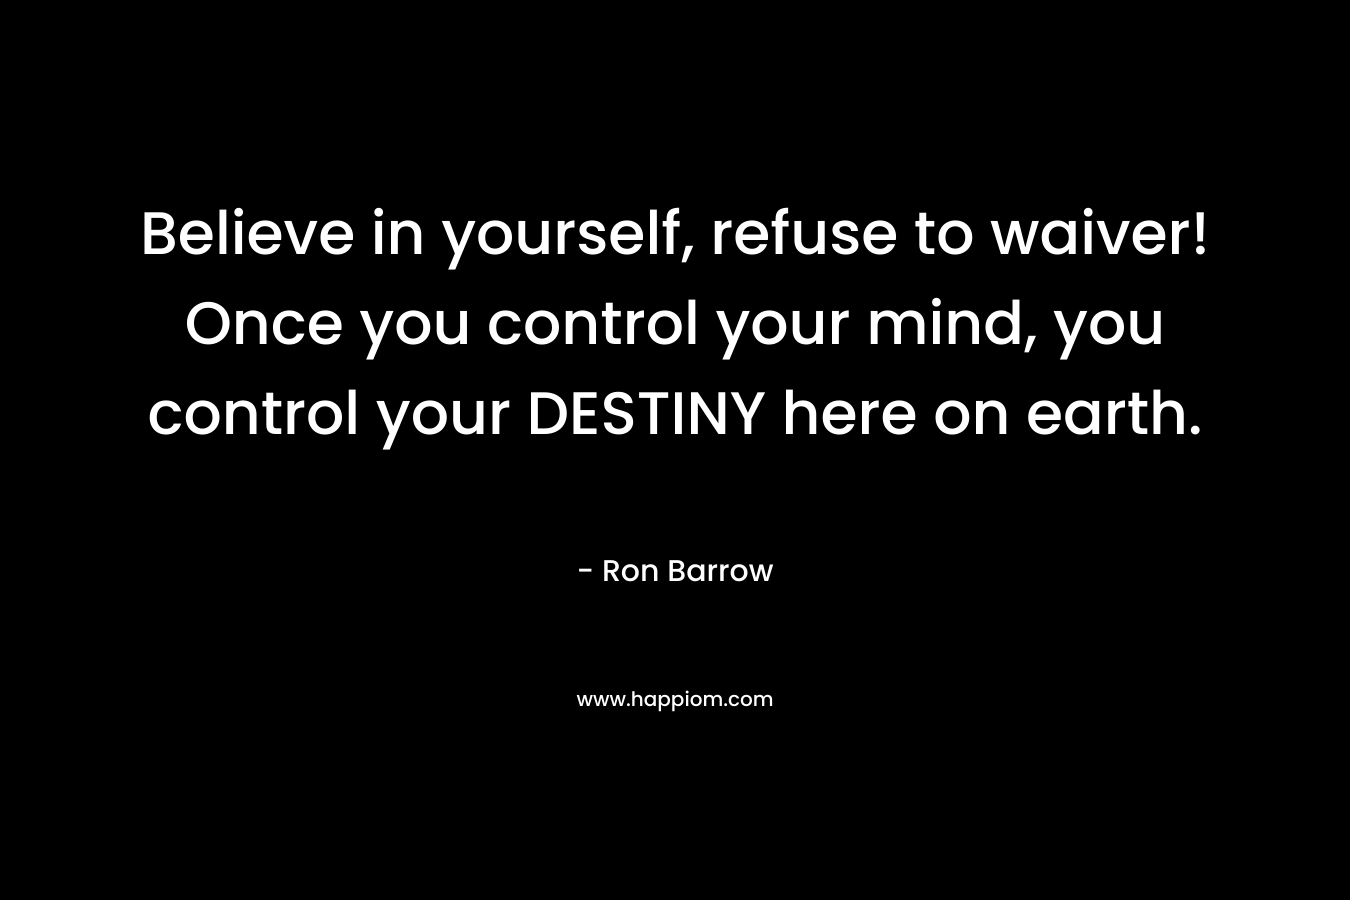 Believe in yourself, refuse to waiver! Once you control your mind, you control your DESTINY here on earth.